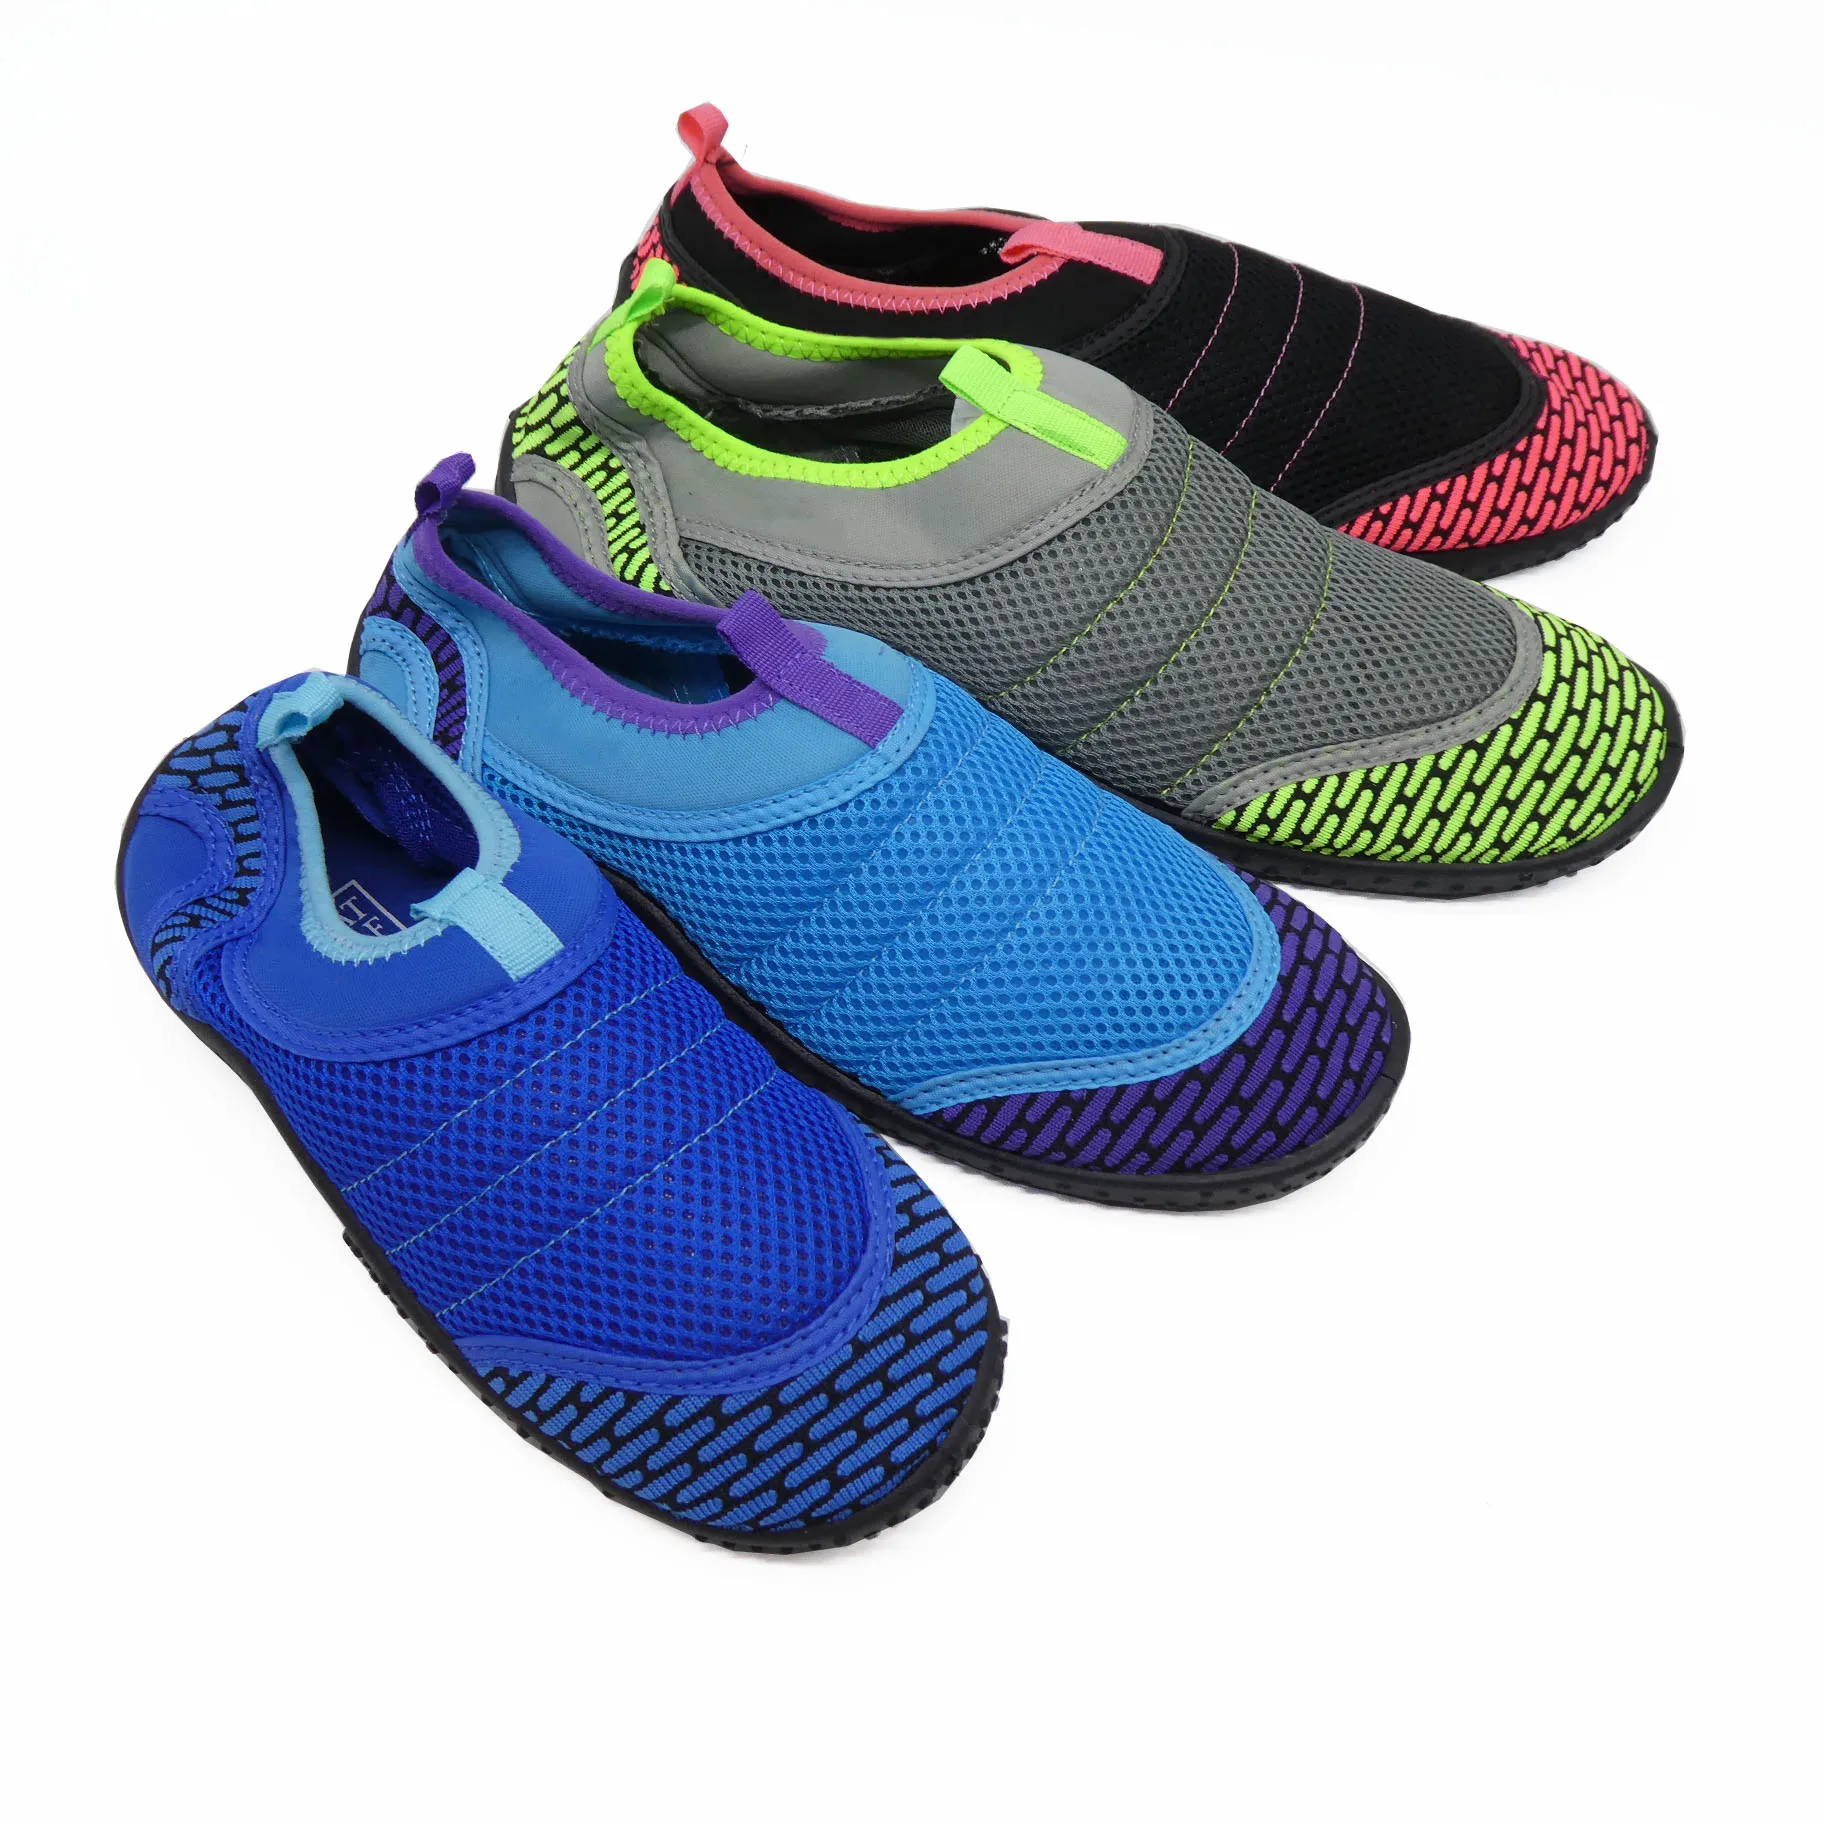 Waterproof Beach Shoes With Custom LOGO Aqua Swimming Water Shoes Breathable Soft Barefoot Outdoor Beach Slippers